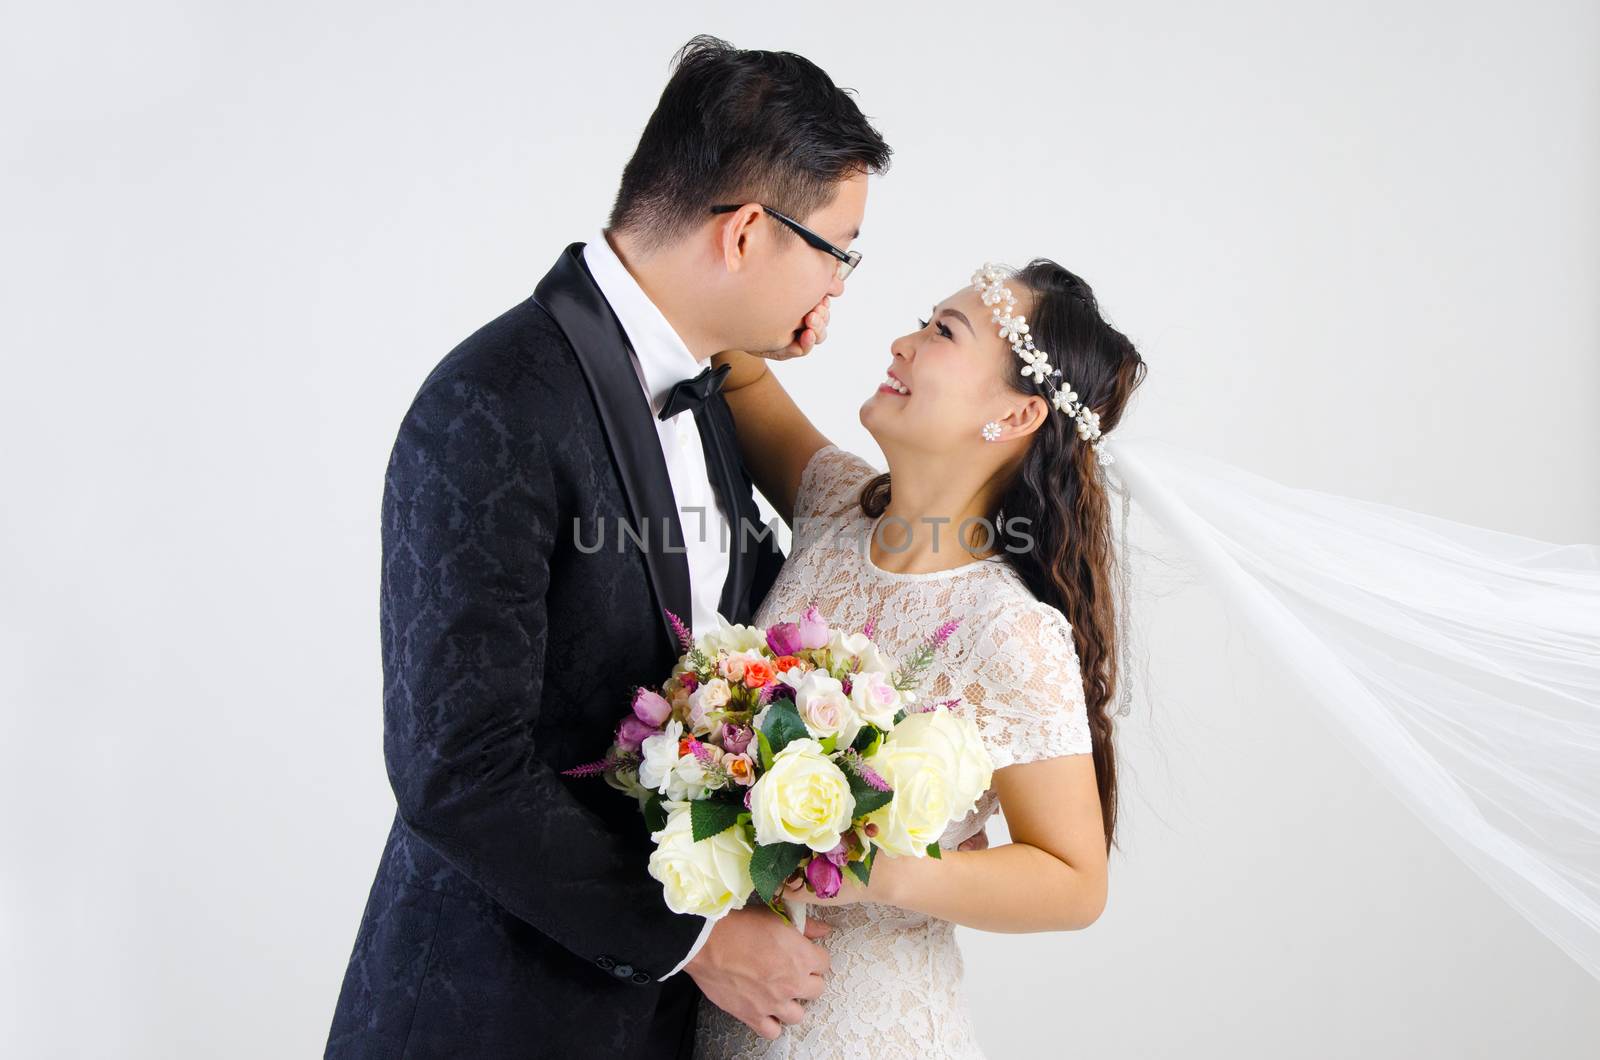 Attractive Bride and Groom at Wedding over grey background